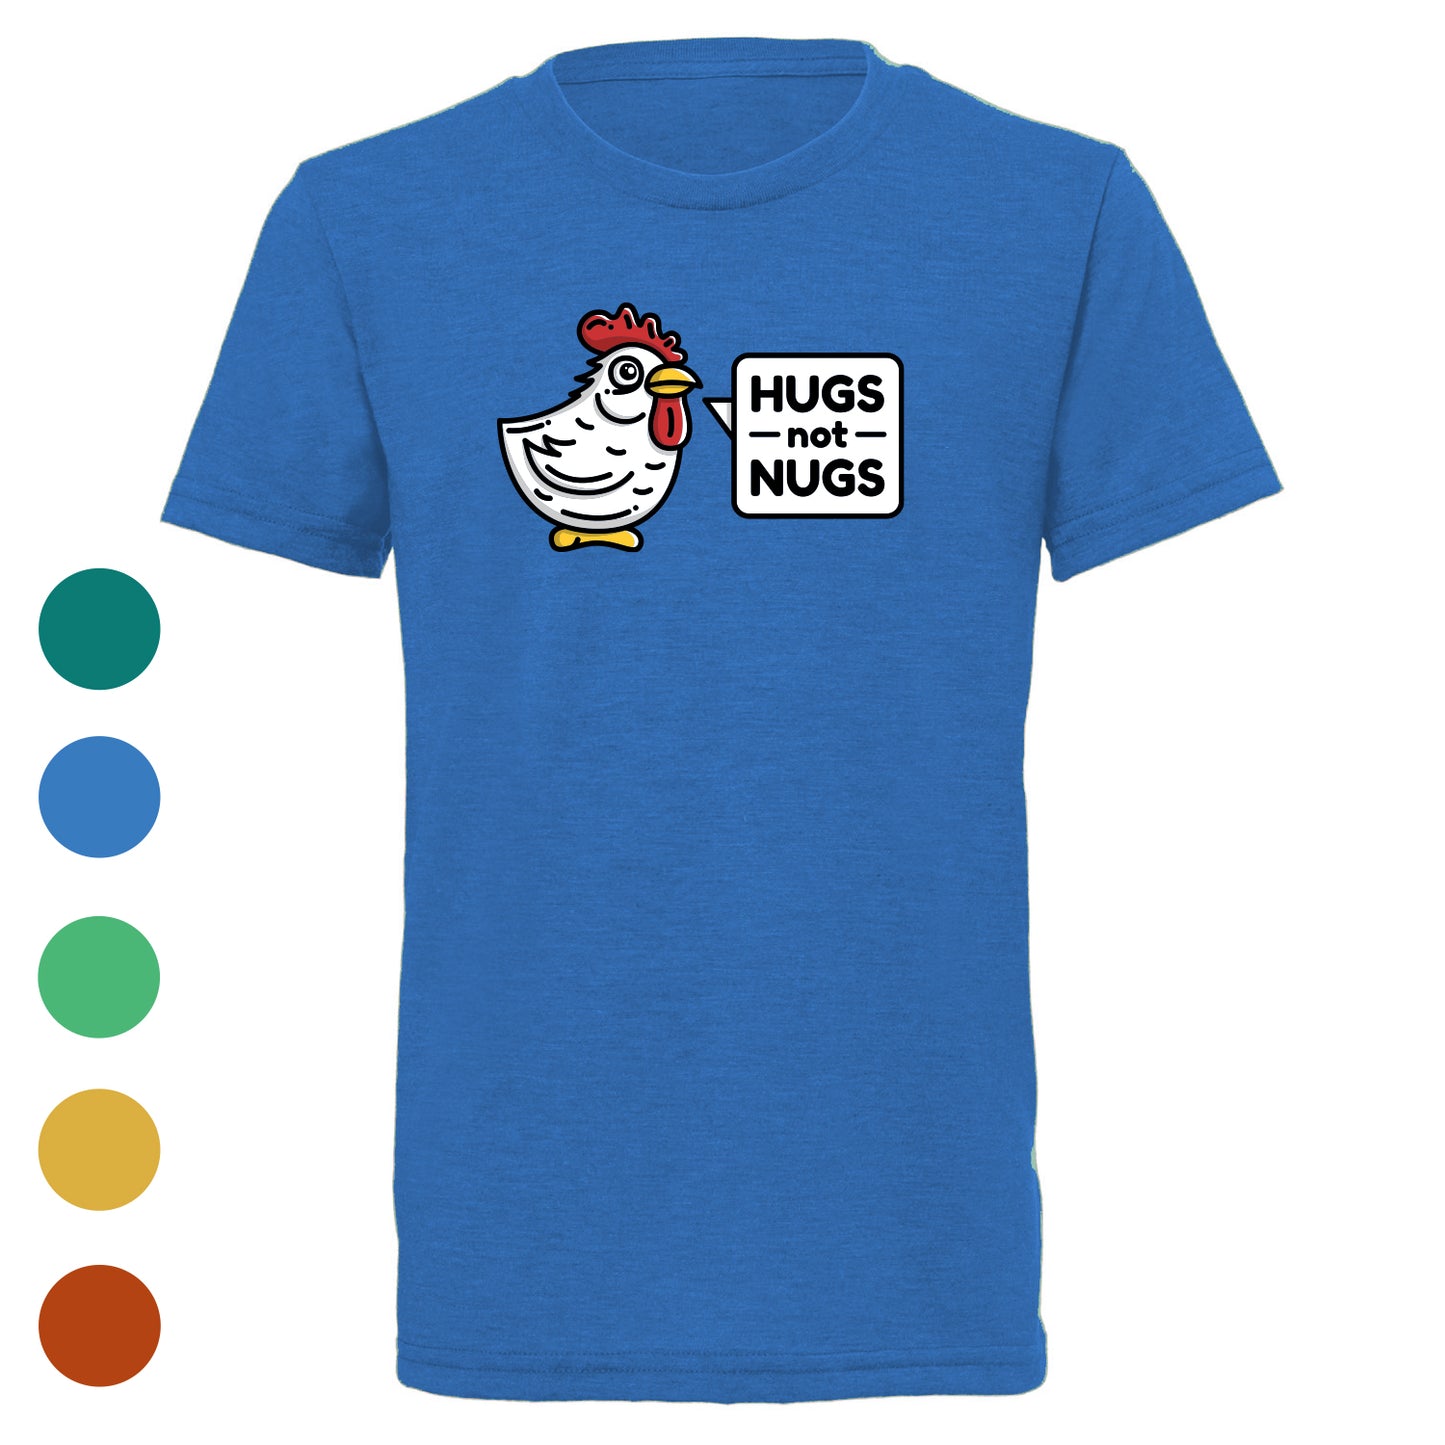 Youth's Hugs Not Nugs Youth Tri-Blend T-Shirt - Available in 6 Colors